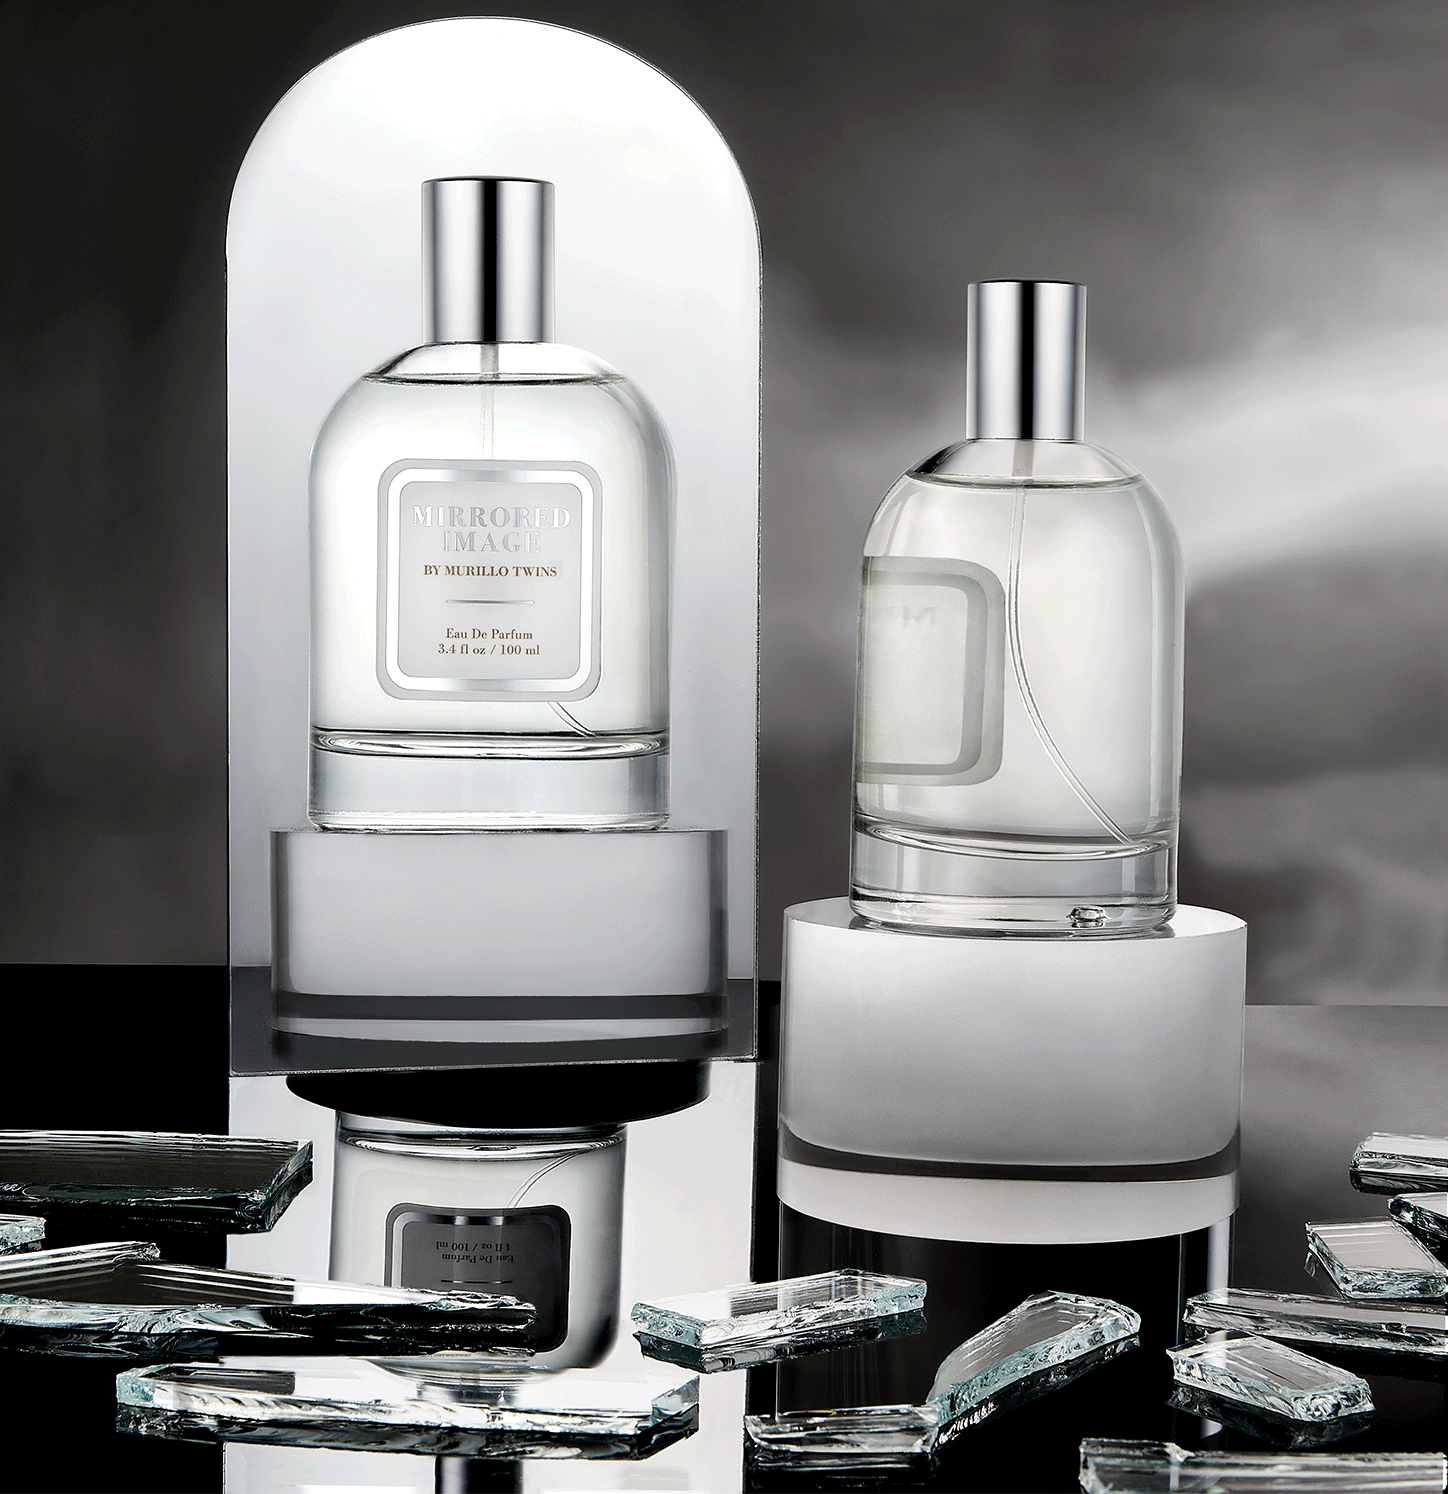 Best-selling celebrity perfume, Mirrored Image, reflecting in a mirror with broken glass around it.